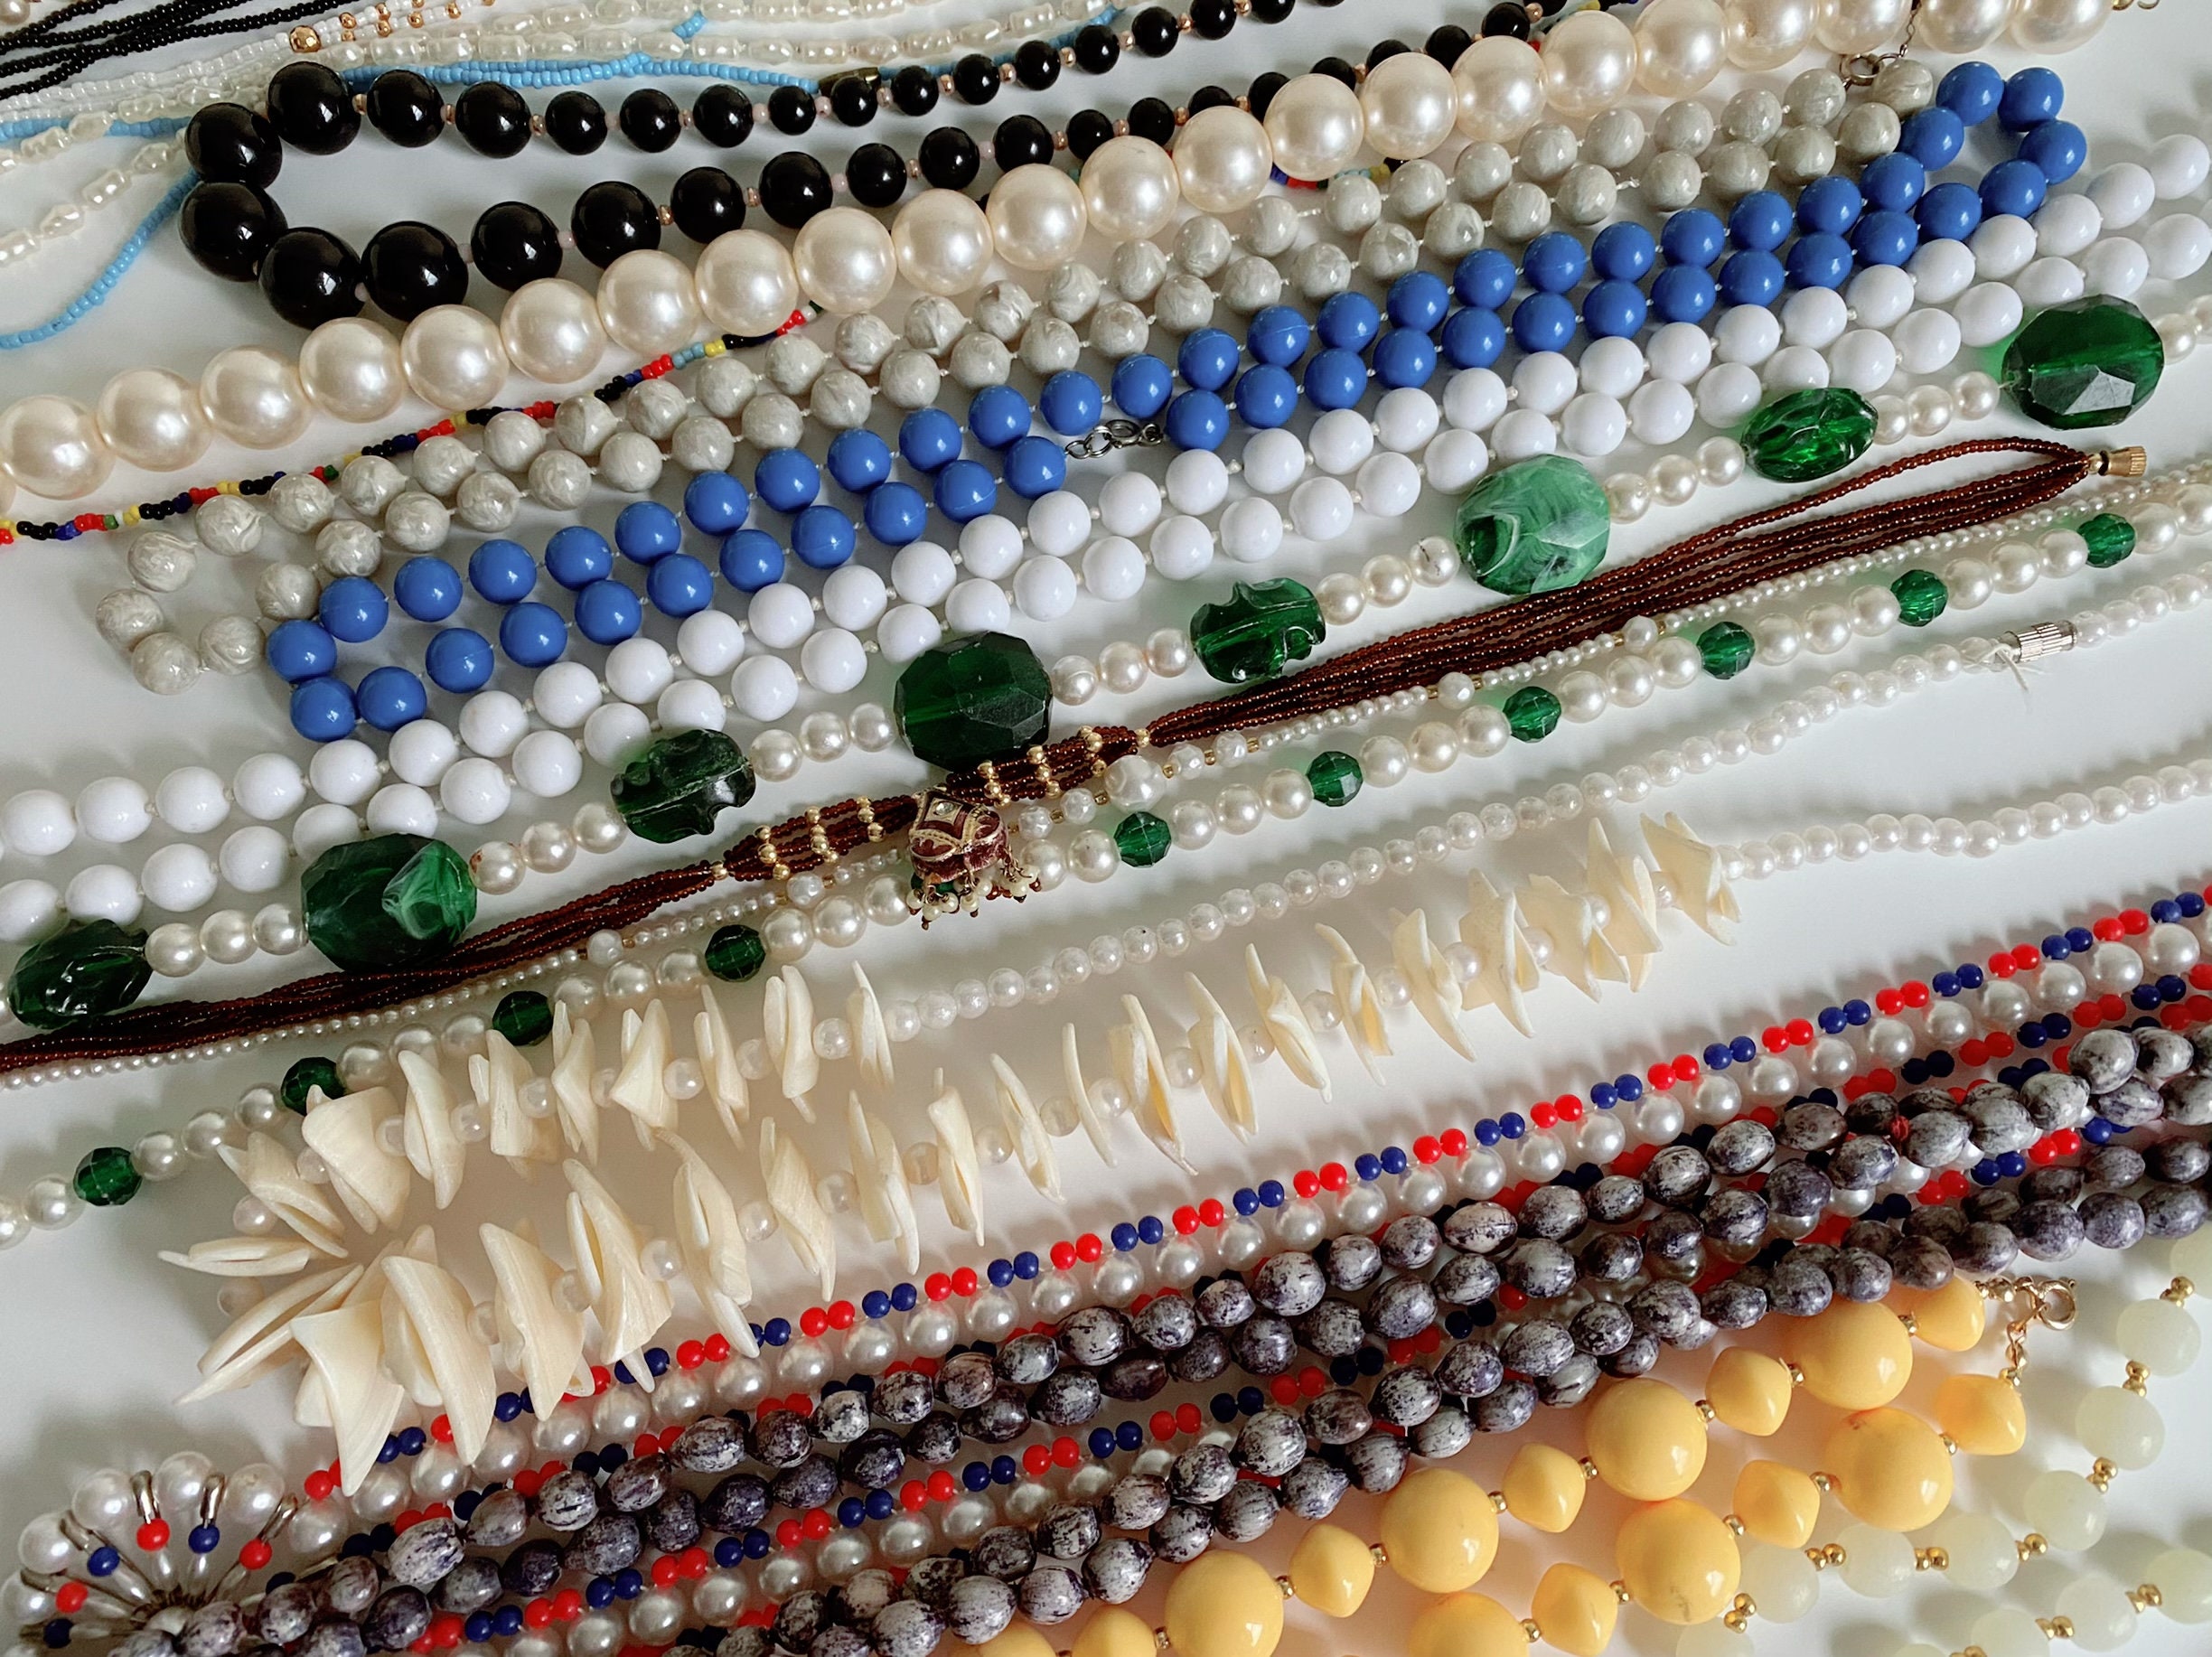 Vintage Beaded Necklaces Lot 22pc Handmade Jewelry for Craft | Etsy